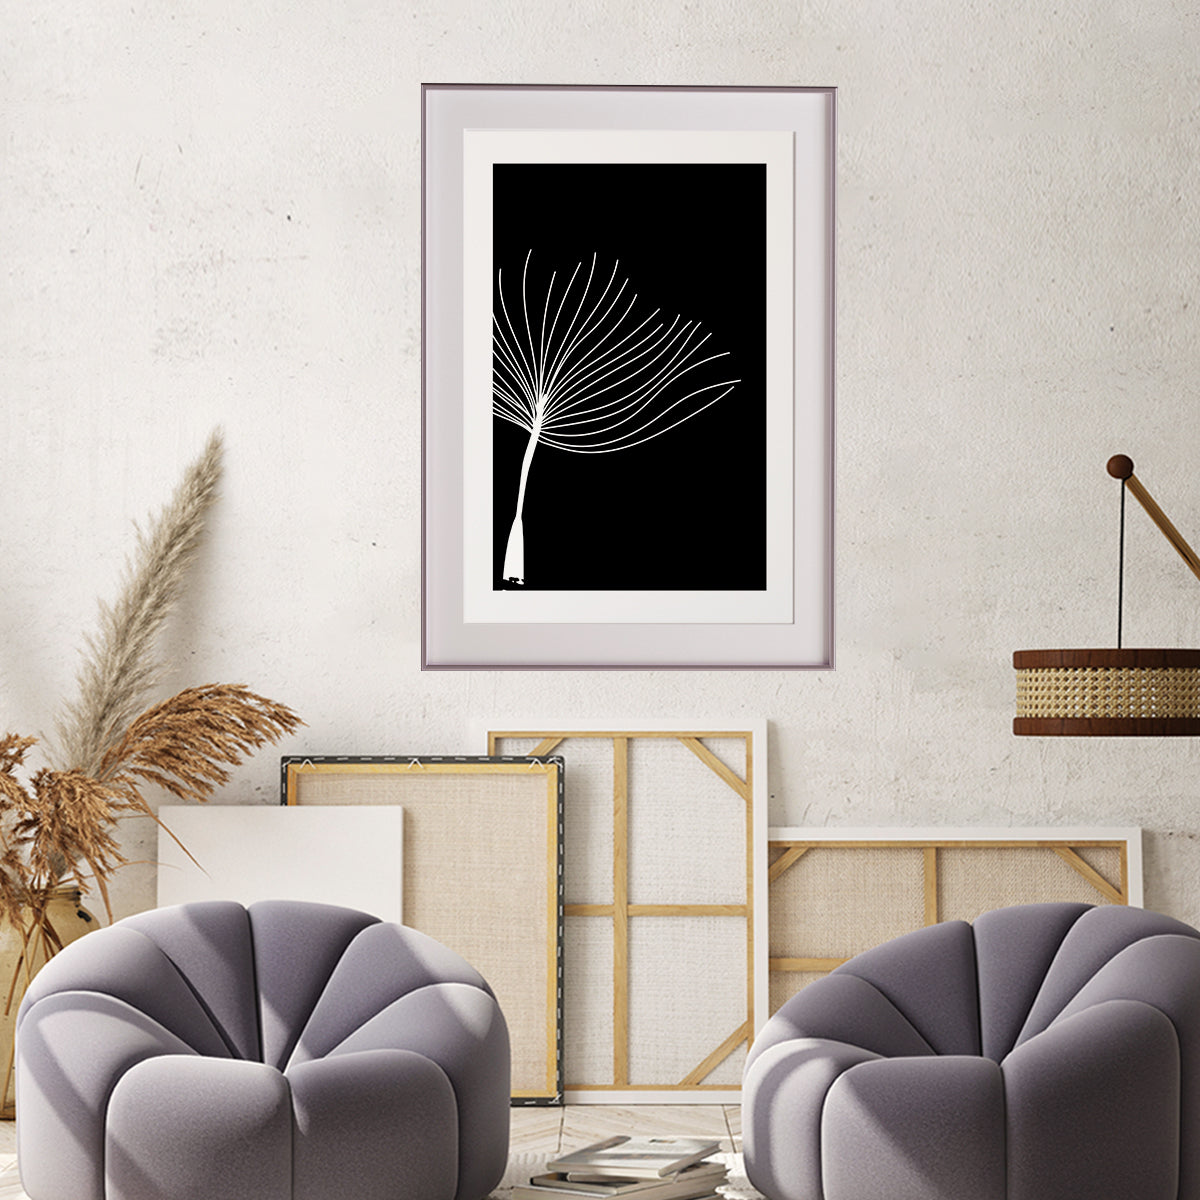 Minimalist Dandelion Seed Black and White Wall Art Posters-Vertical Posters NOT FRAMED-CetArt-8″x10″ inches-CetArt